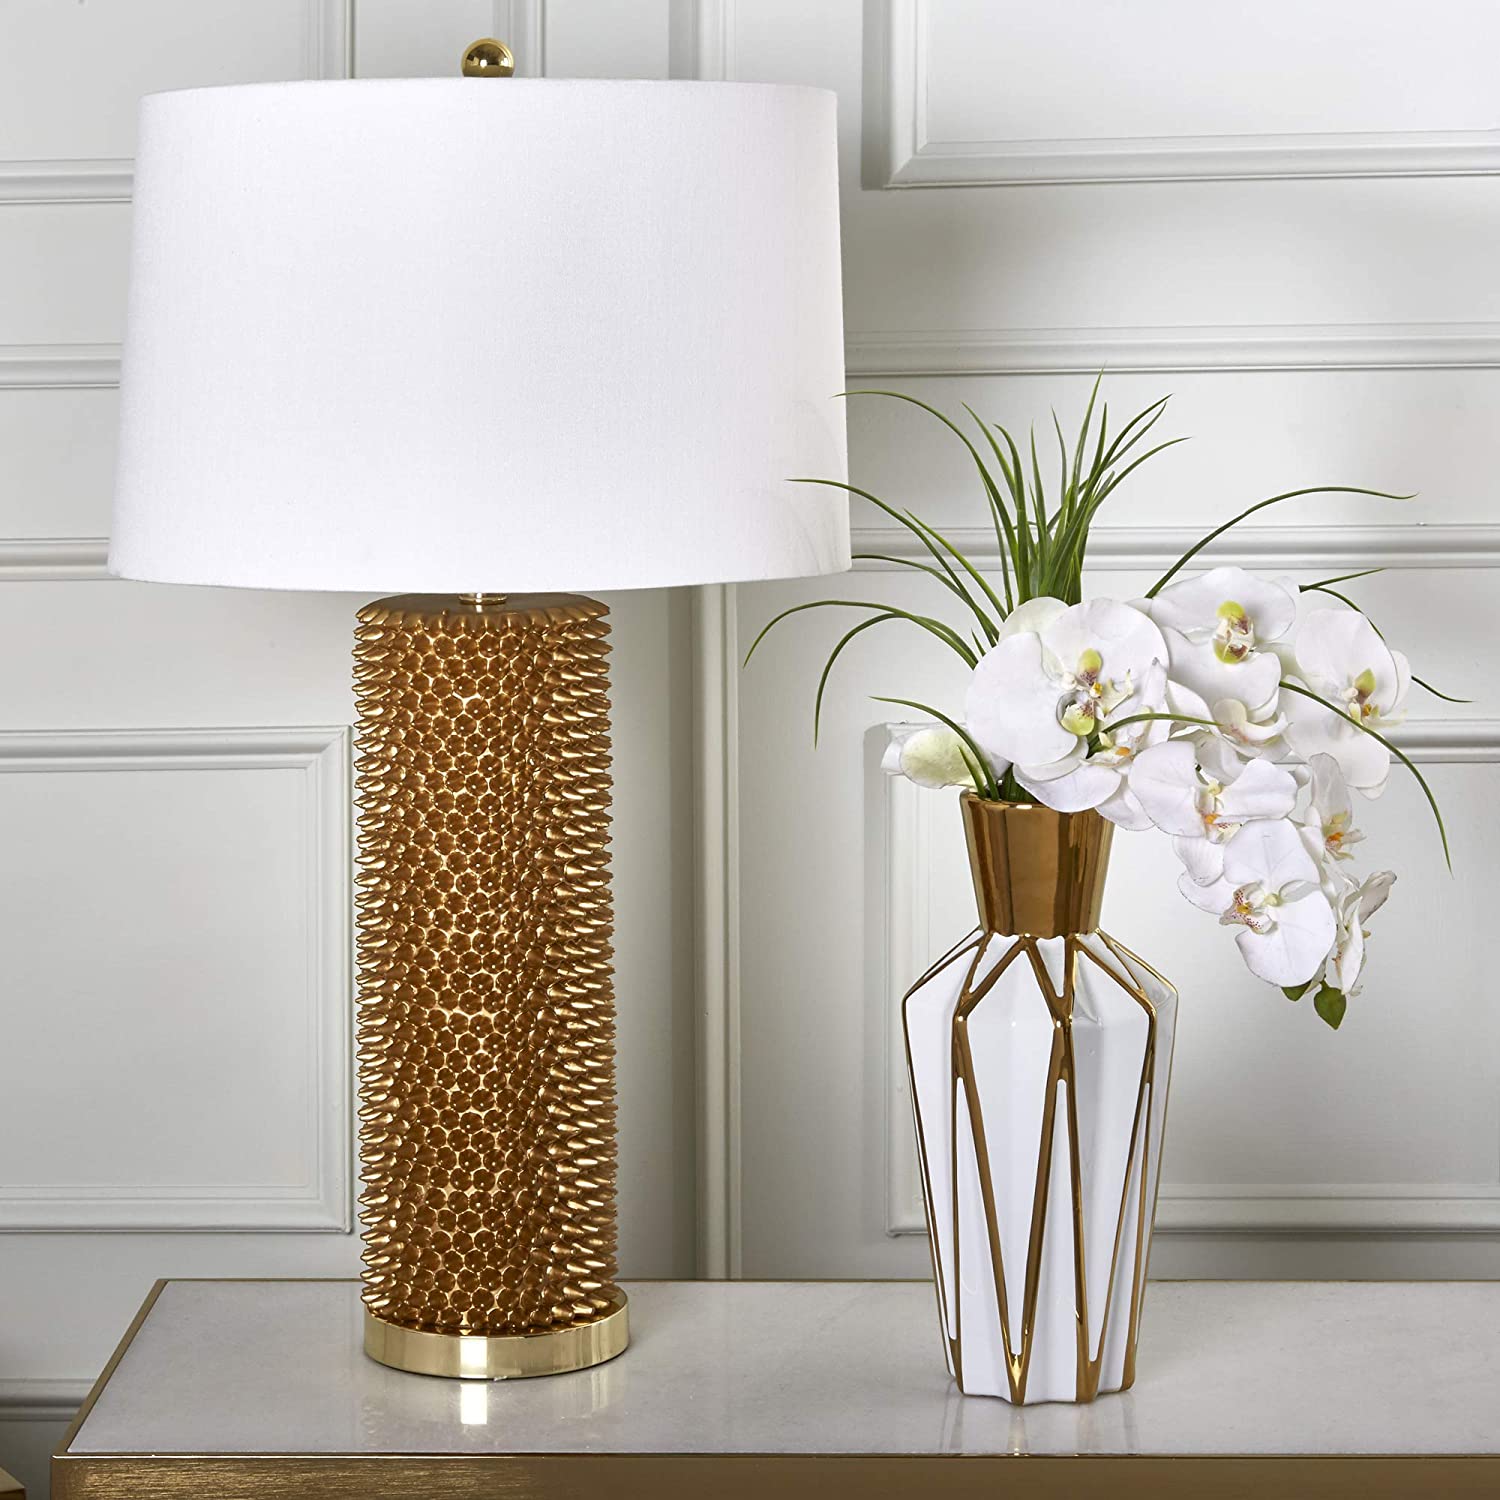 RESIN SPIKED TABLE LAMP - GOLD